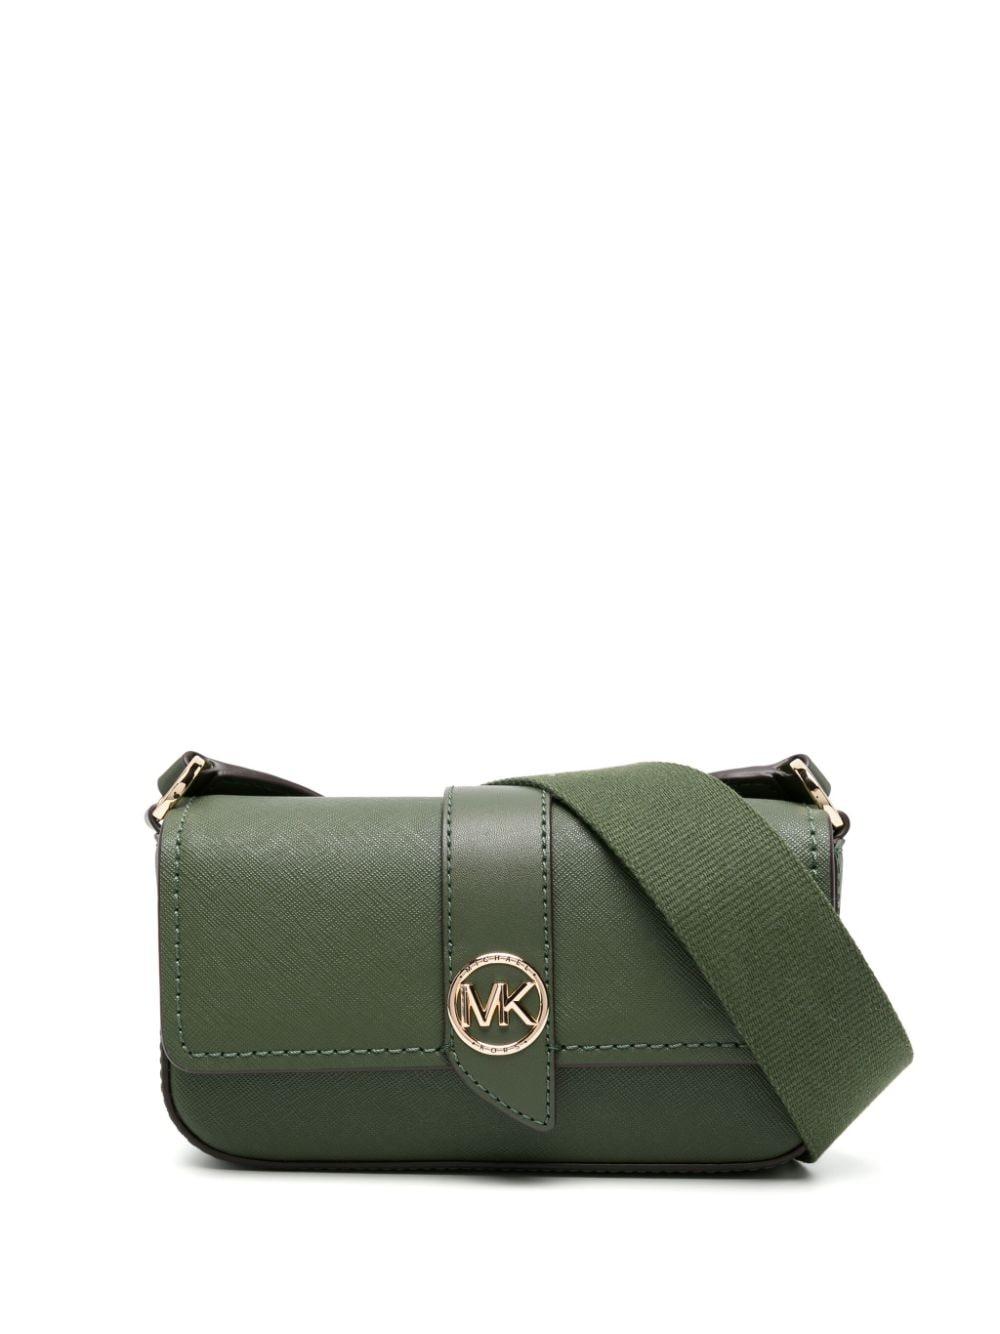 Michael Kors Extra-small Greenwich Leather Shoulder Bag